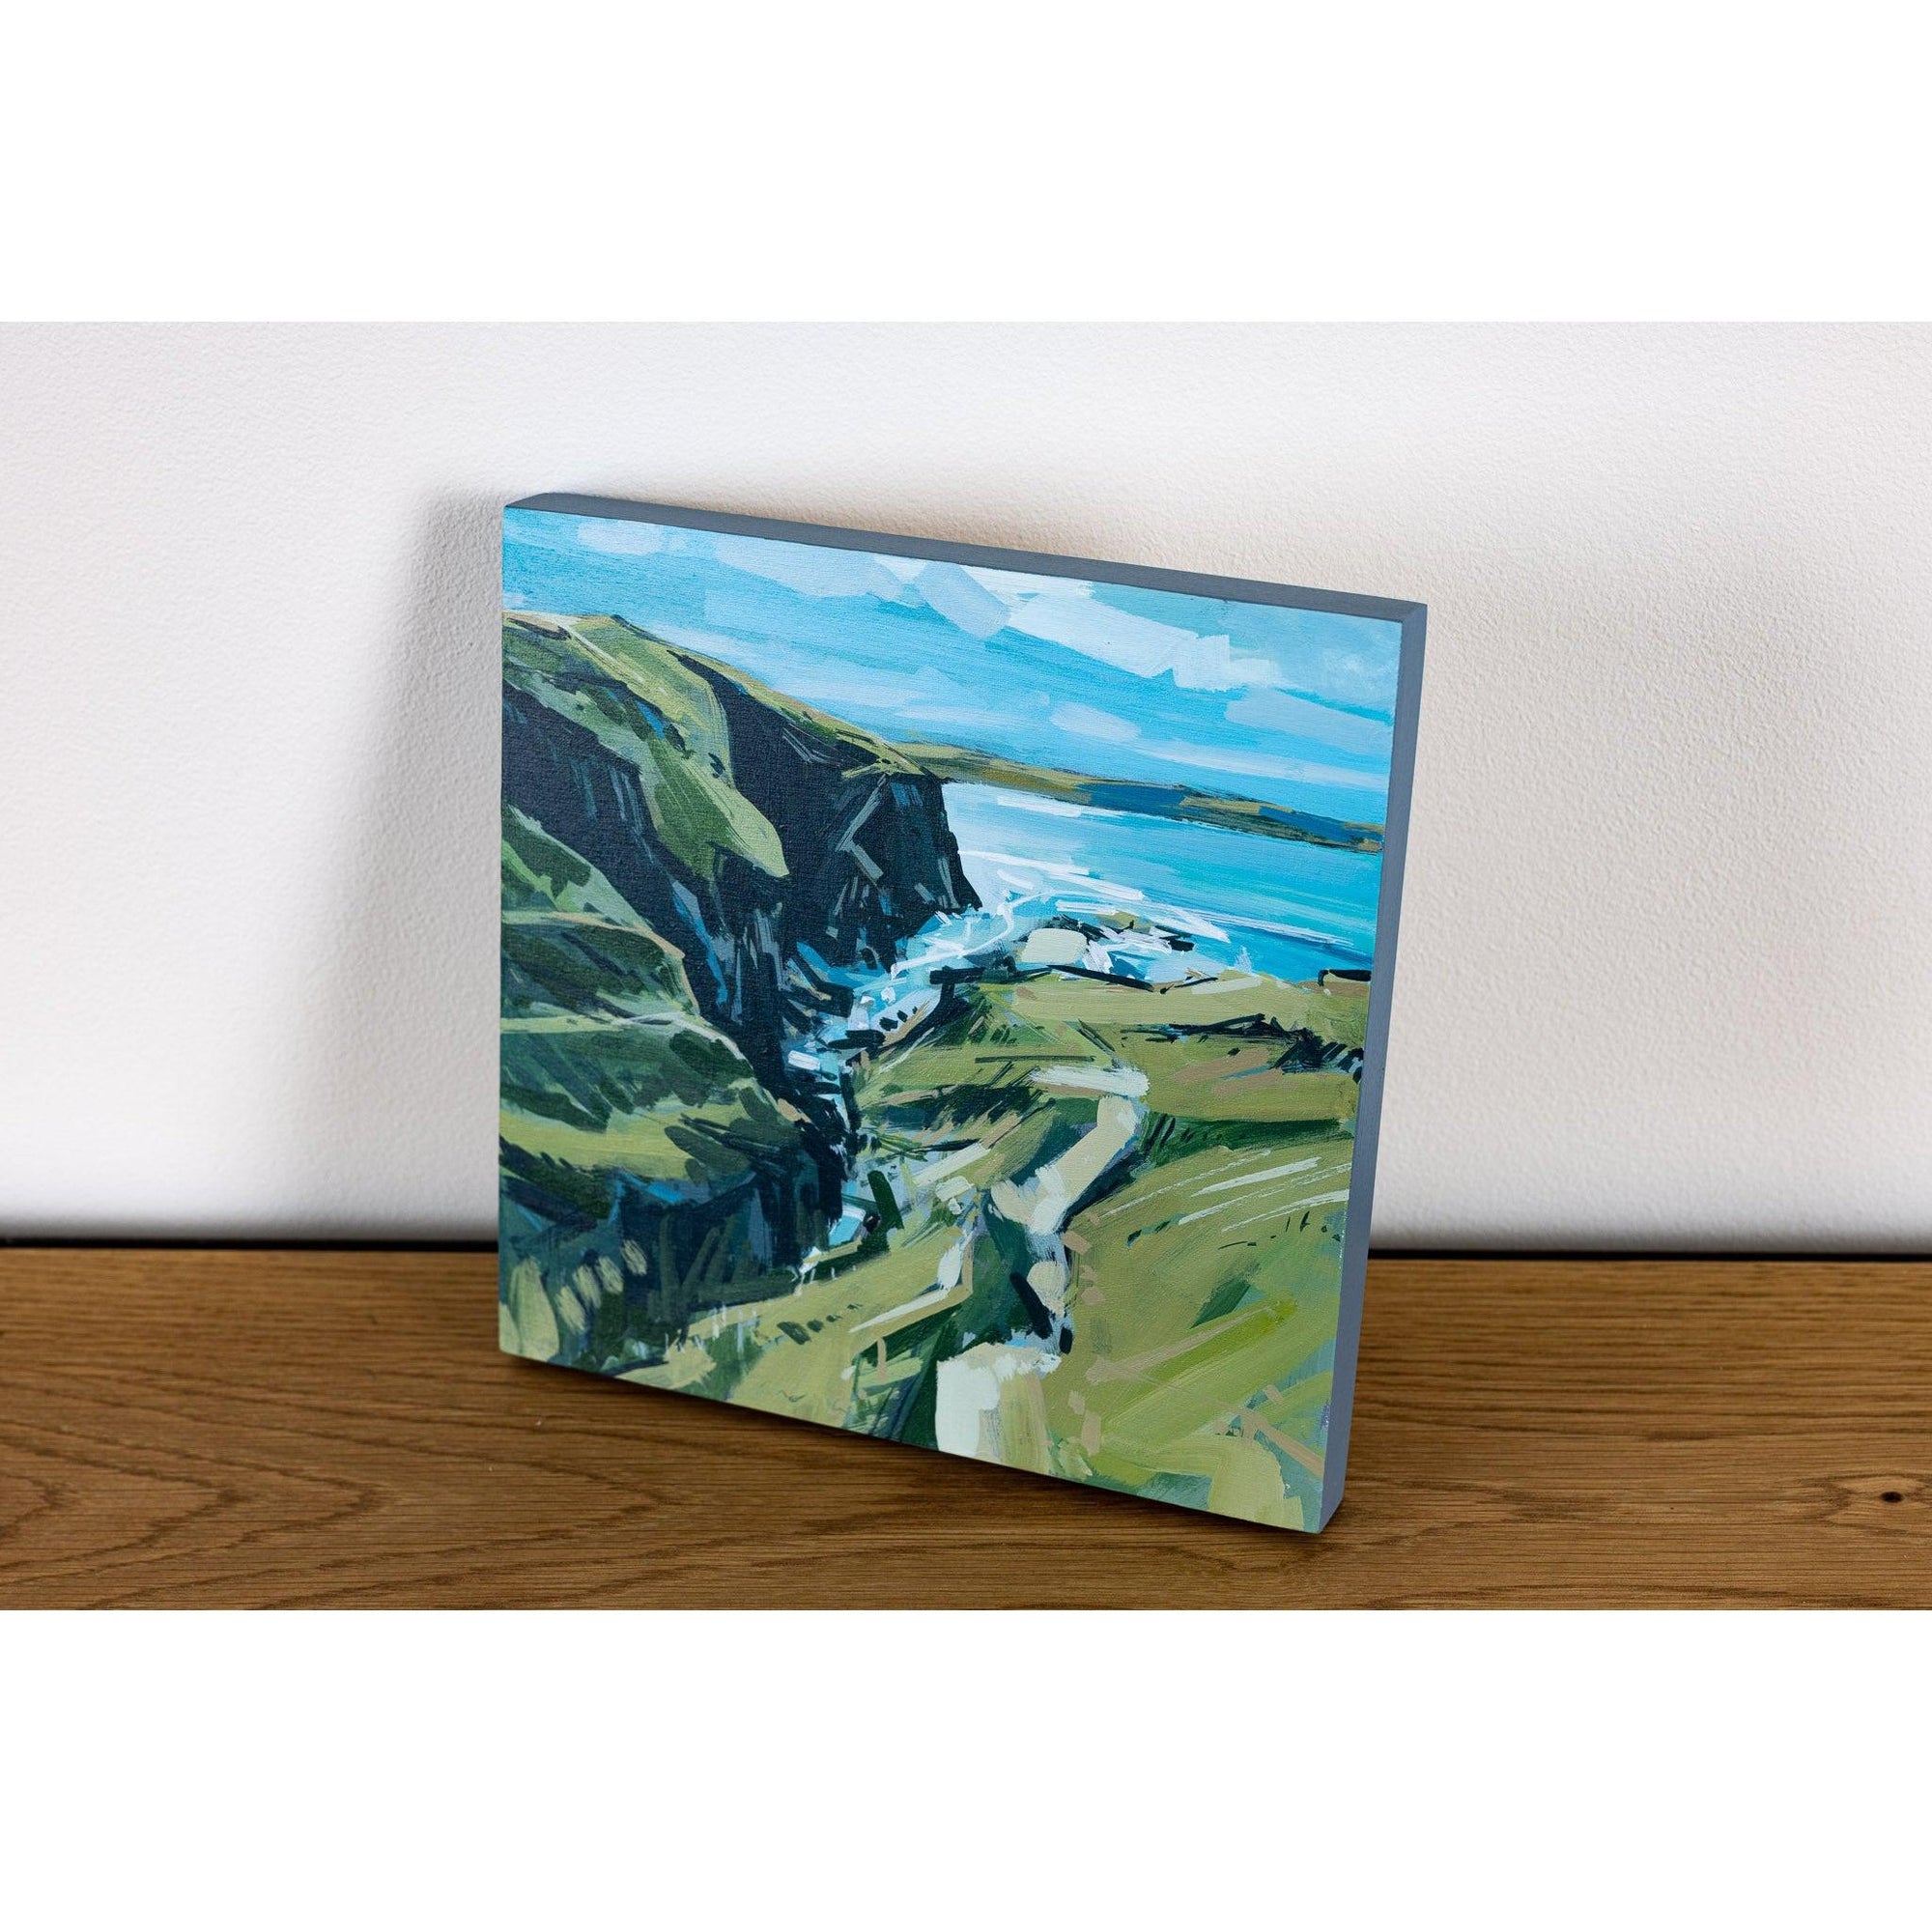 ‘Tregudda Gorge’ acrylic on wood block by Imogen Bone. Available at Padstow Gallery, Cornwall